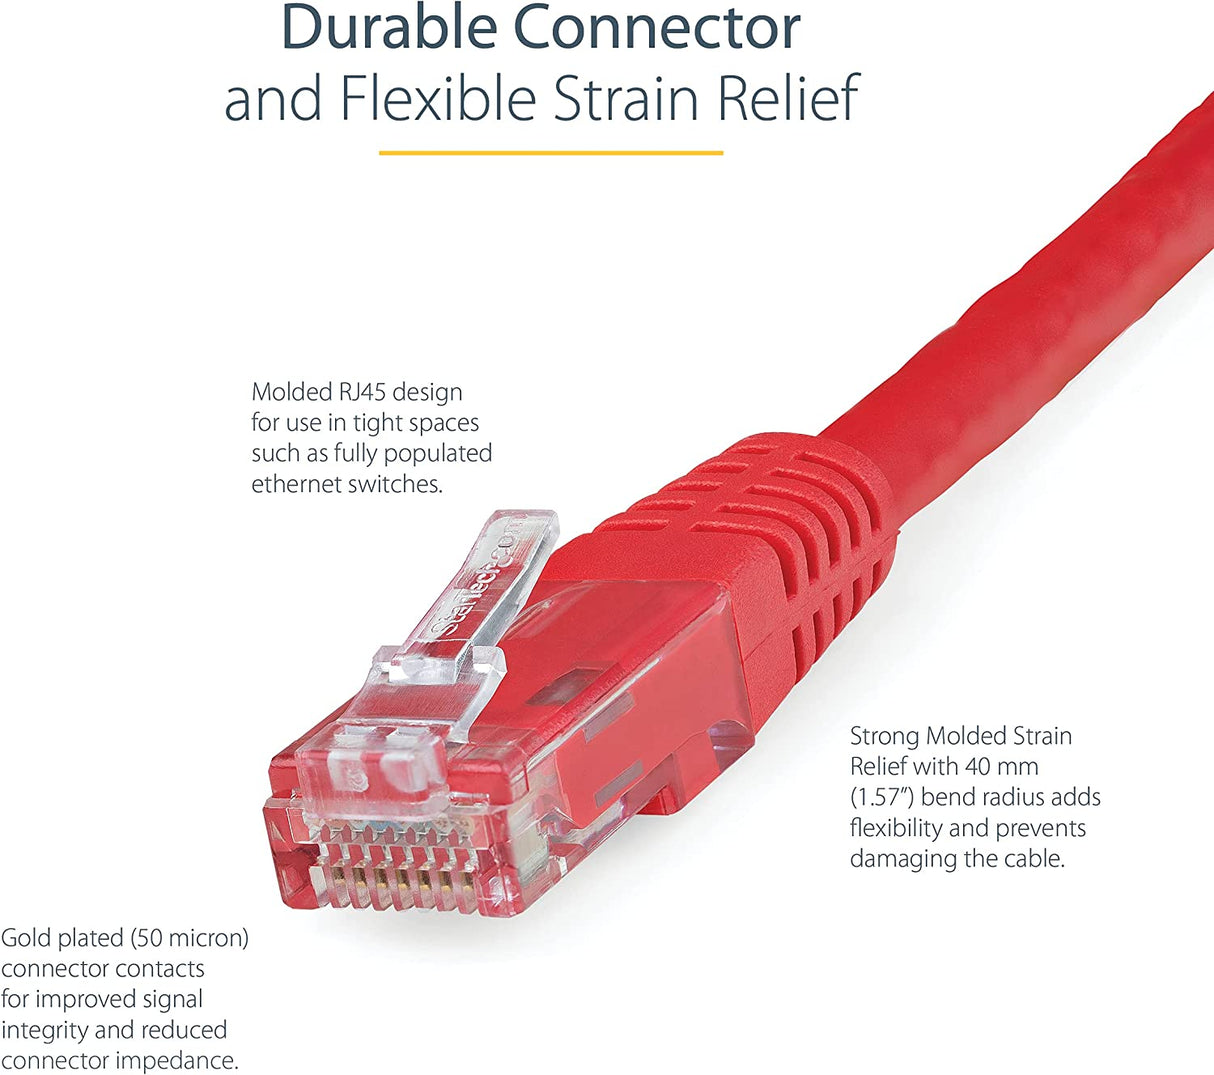 StarTech.com 20ft CAT6 Ethernet Cable - Red CAT 6 Gigabit Ethernet Wire -650MHz 100W PoE++ RJ45 UTP Molded Category 6 Network/Patch Cord w/Strain Relief/Fluke Tested UL/TIA Certified (C6PATCH20RD) Red 20 ft/6.1 m